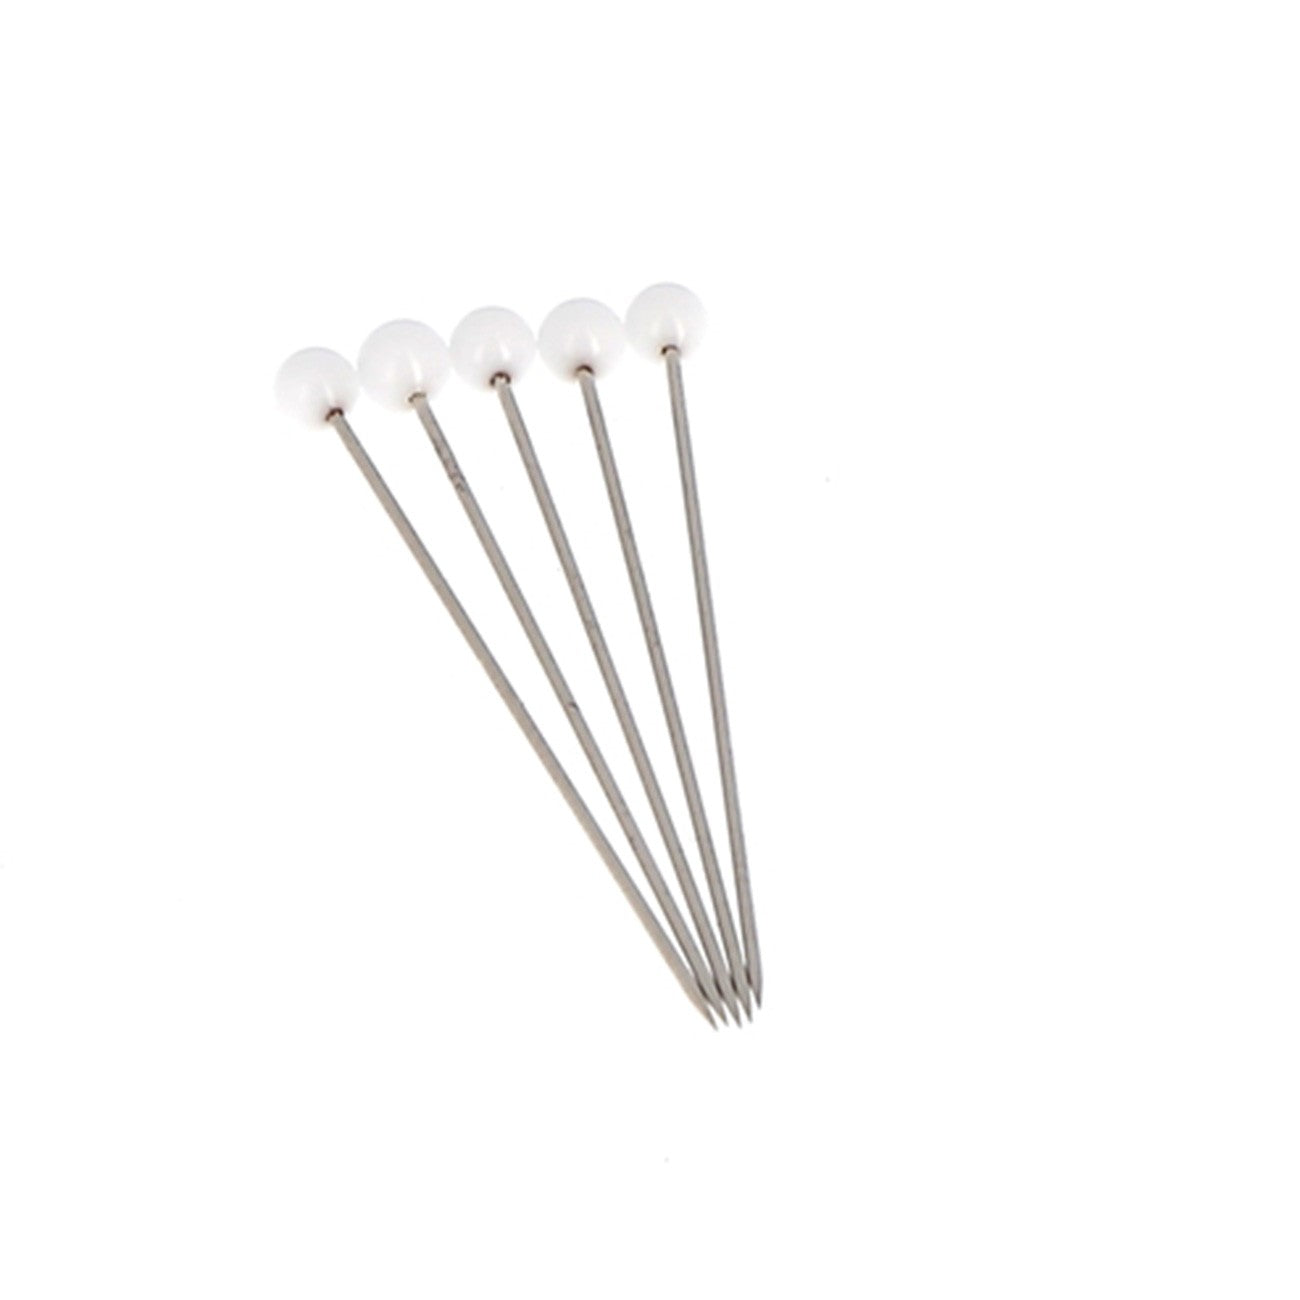 Bohin 26703 Yellow Head Quilting Pin Size 28 - 1 3/4in 200ct